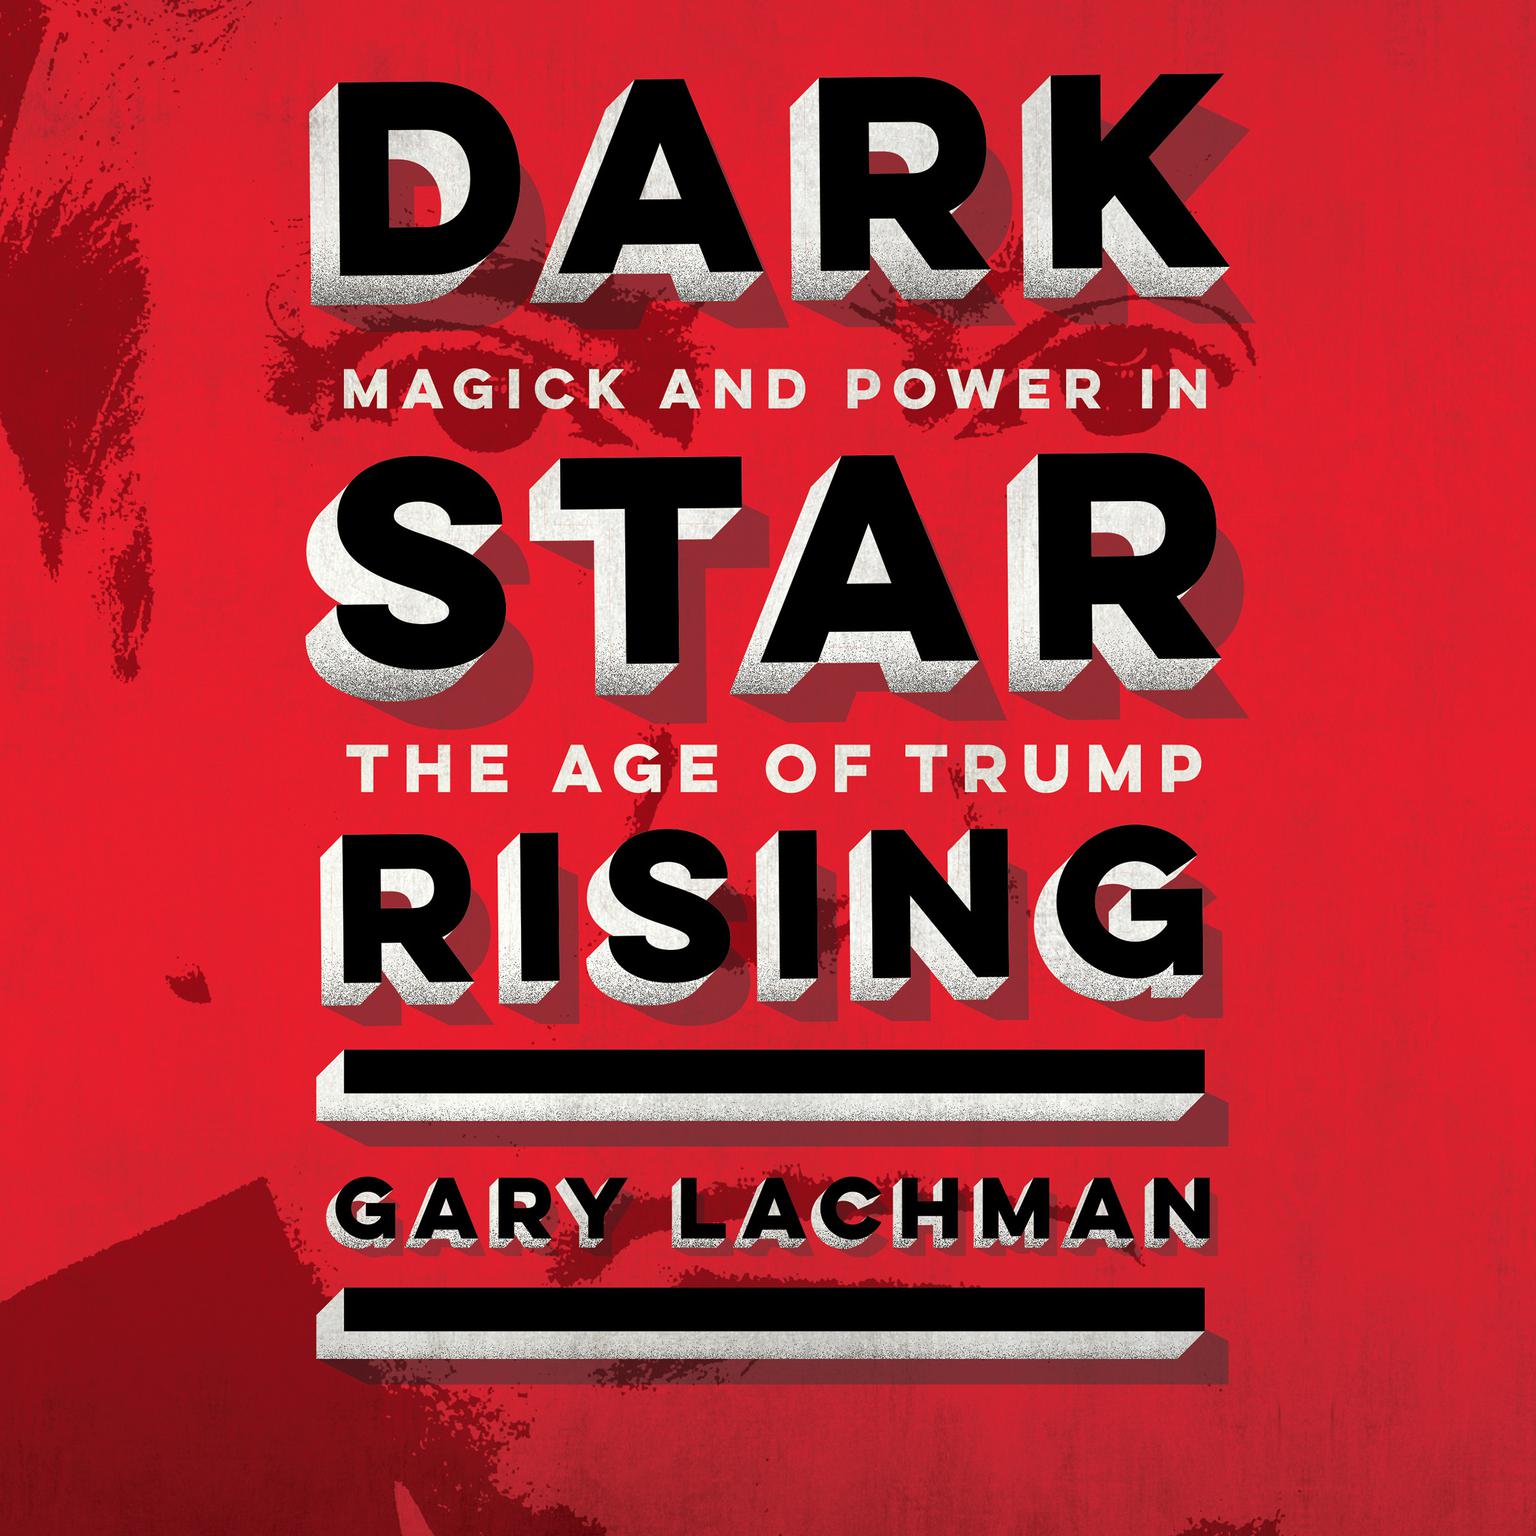 Dark Star Rising: Magick and Power in the Age of Trump Audiobook, by Gary Lachman